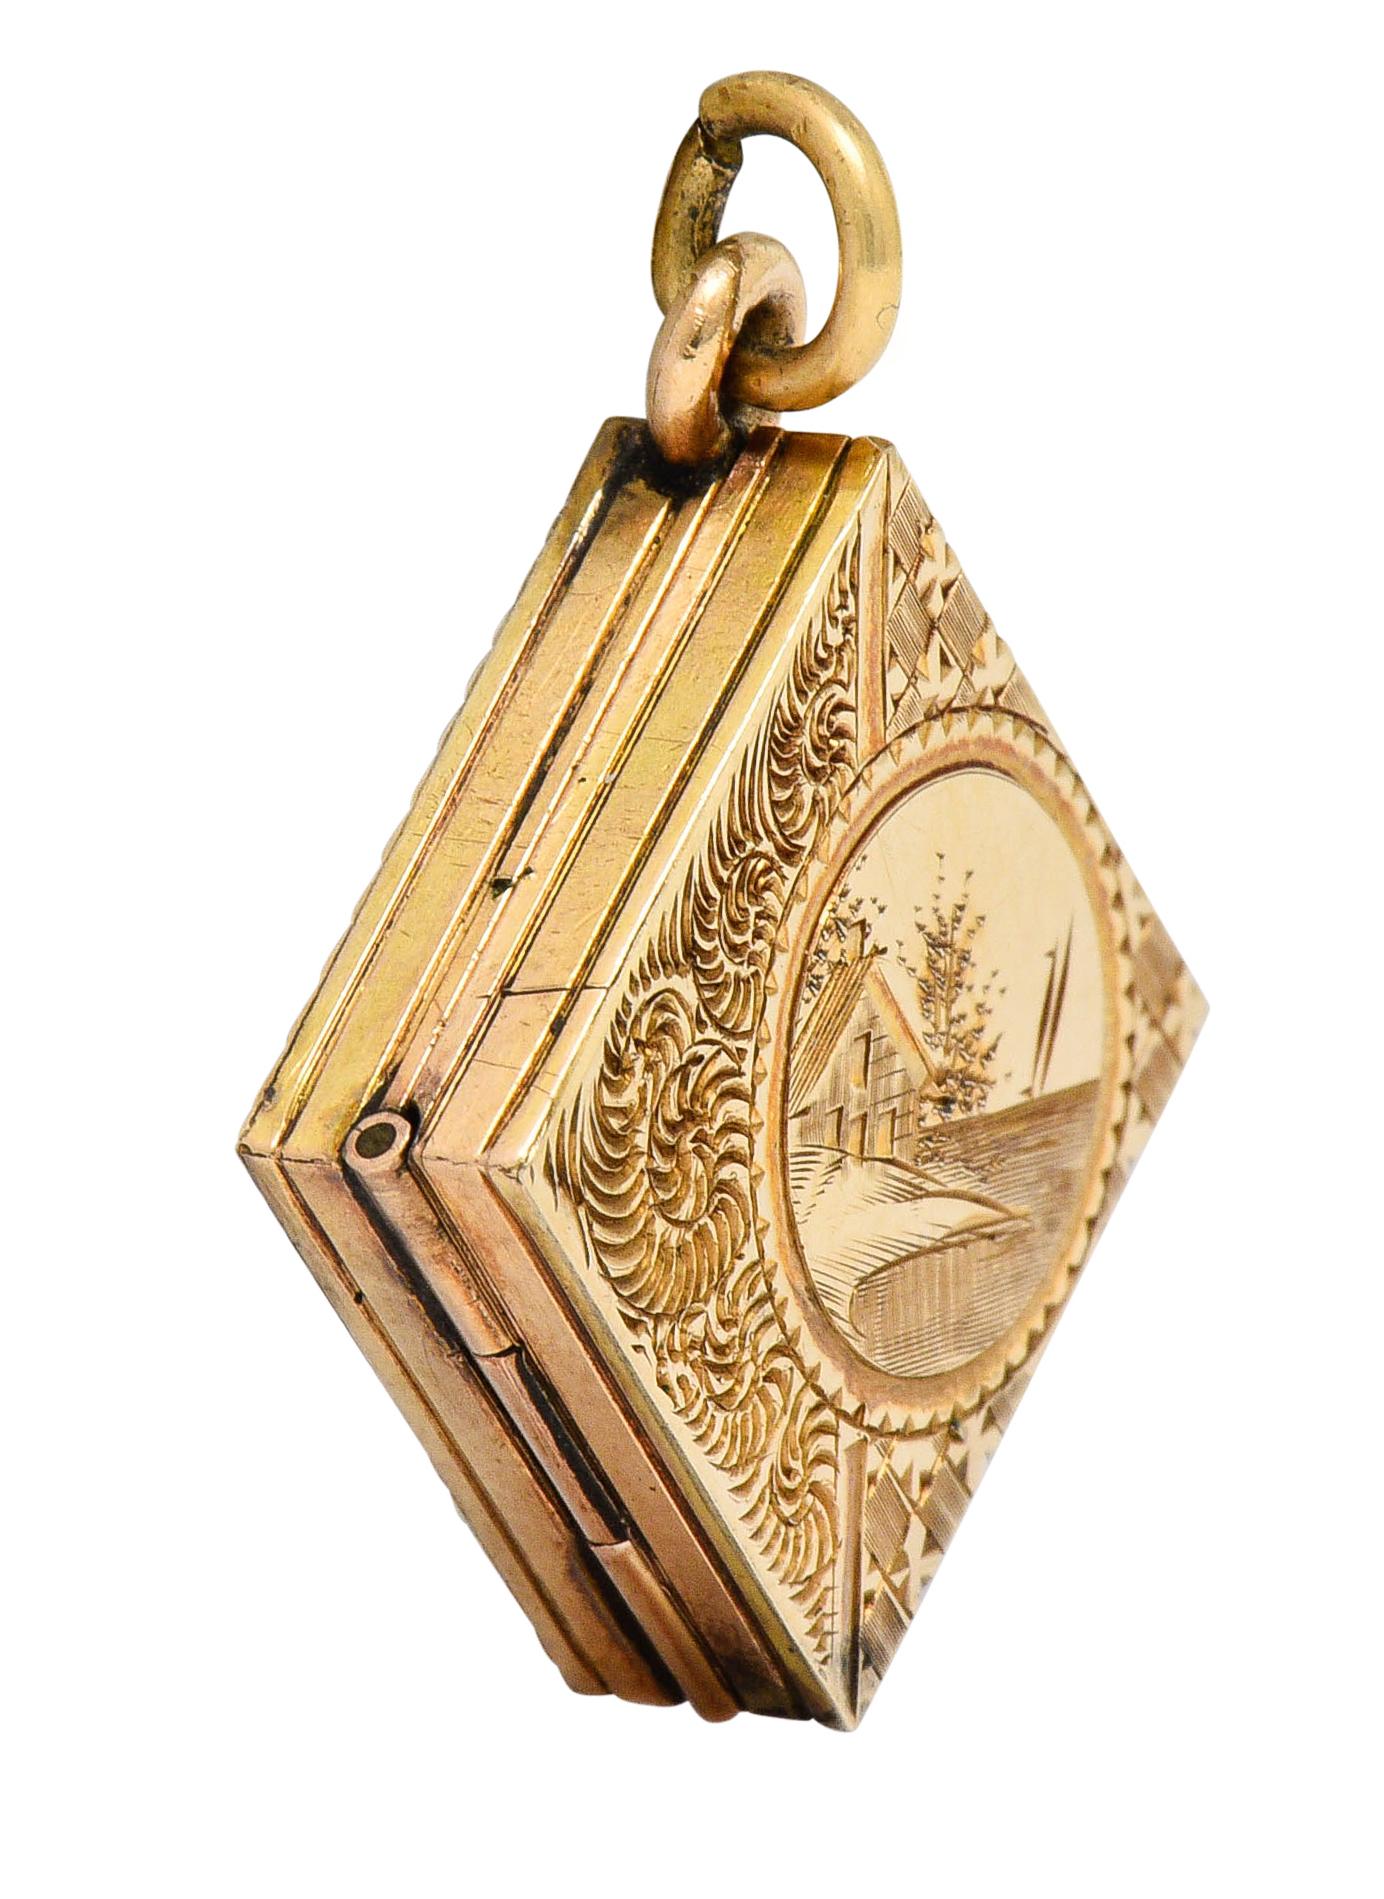 Square shaped locket deeply engraved to depict a lake-house landscape

Accented by deeply ribbed volutes and floral details

While back features a ridged border and the monogrammed initials 'G.T.'

Opens on a hinge to reveal two square recesses,